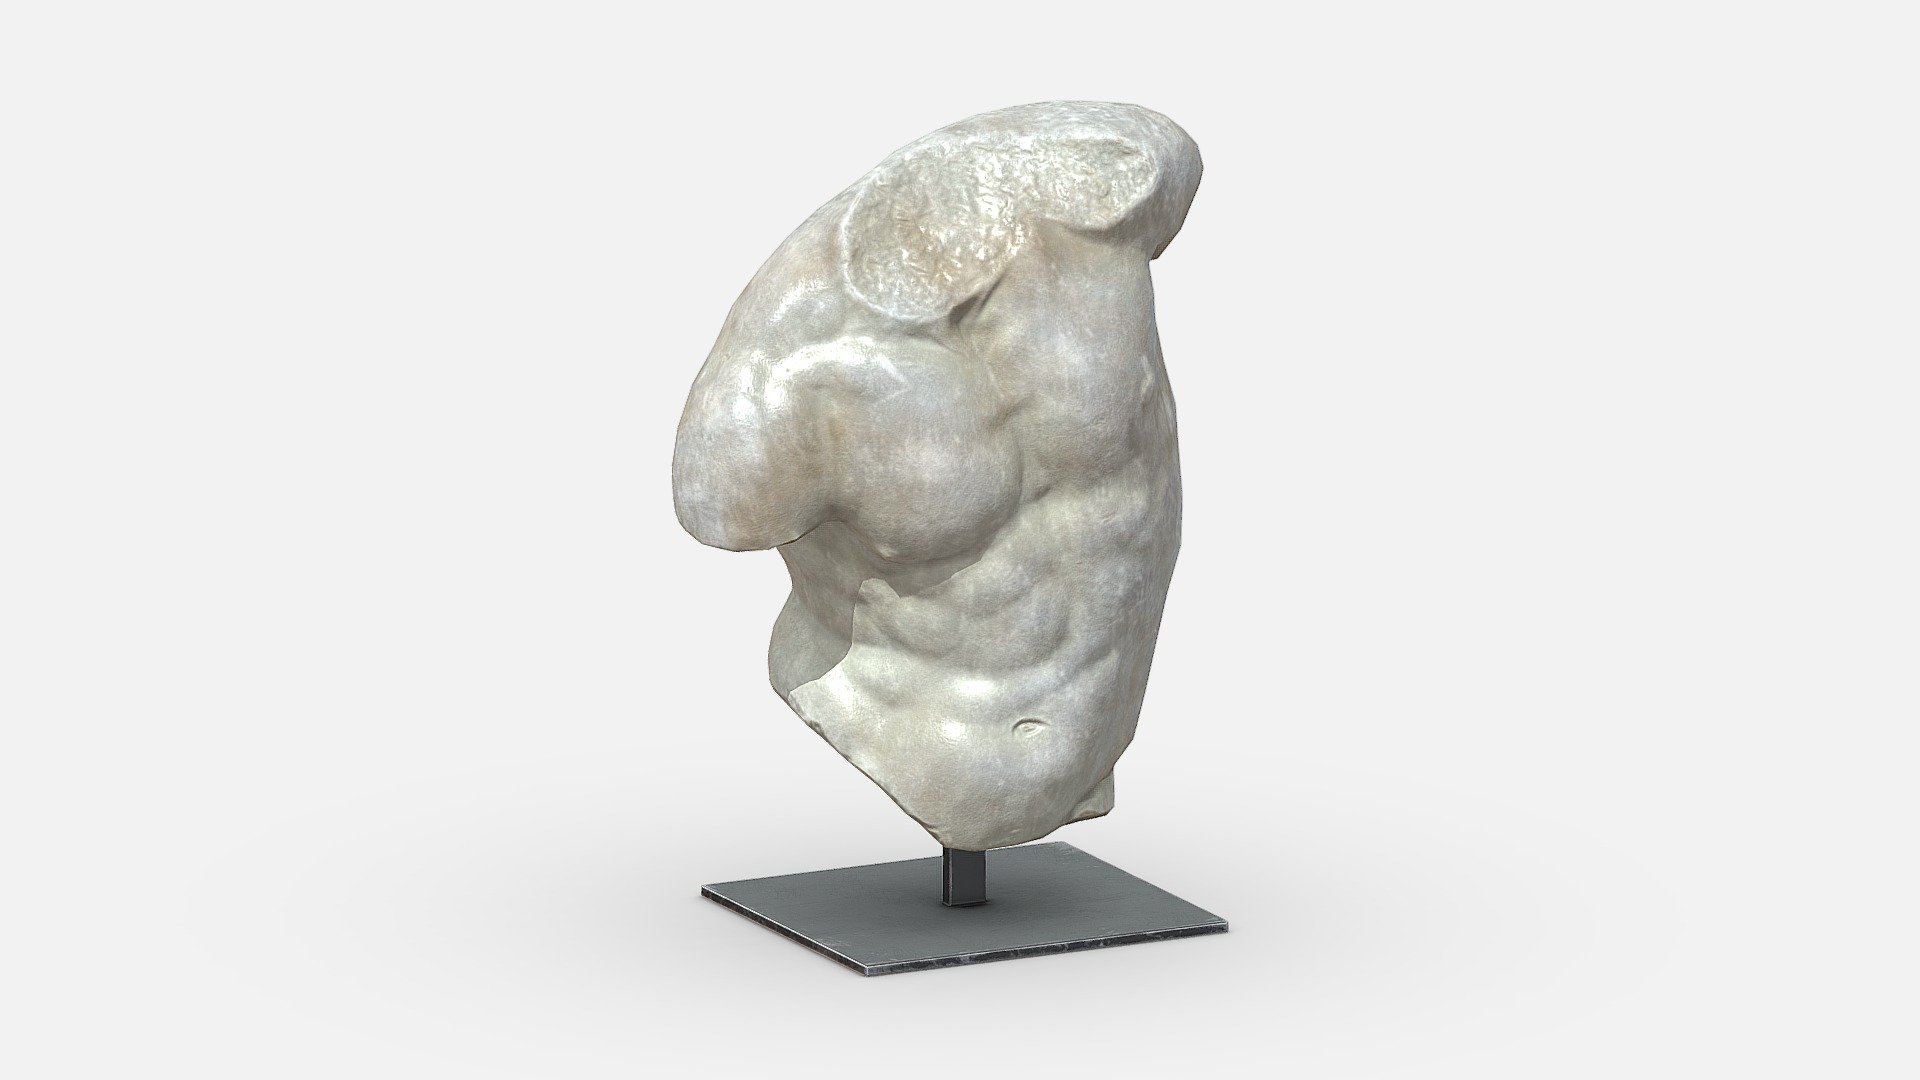 Realistic low-poly sculpture 3D models for professional video game and architecture visualization.
Features:






Virtual Reality (VR) Ready (Oculus, Vive);

Augmented Reality (AR) Ready (ARKit, Vuforia);

Games and other Real-Time apps Ready (Unity 5, Unreal Engine 5);

High resolution textures 4096x4096;

PBR textures (Normal/Diffuse/Metallic/Roughness/AO);

 - Sculpture_06 - Buy Royalty Free 3D model by Enlight3DModel 3d model